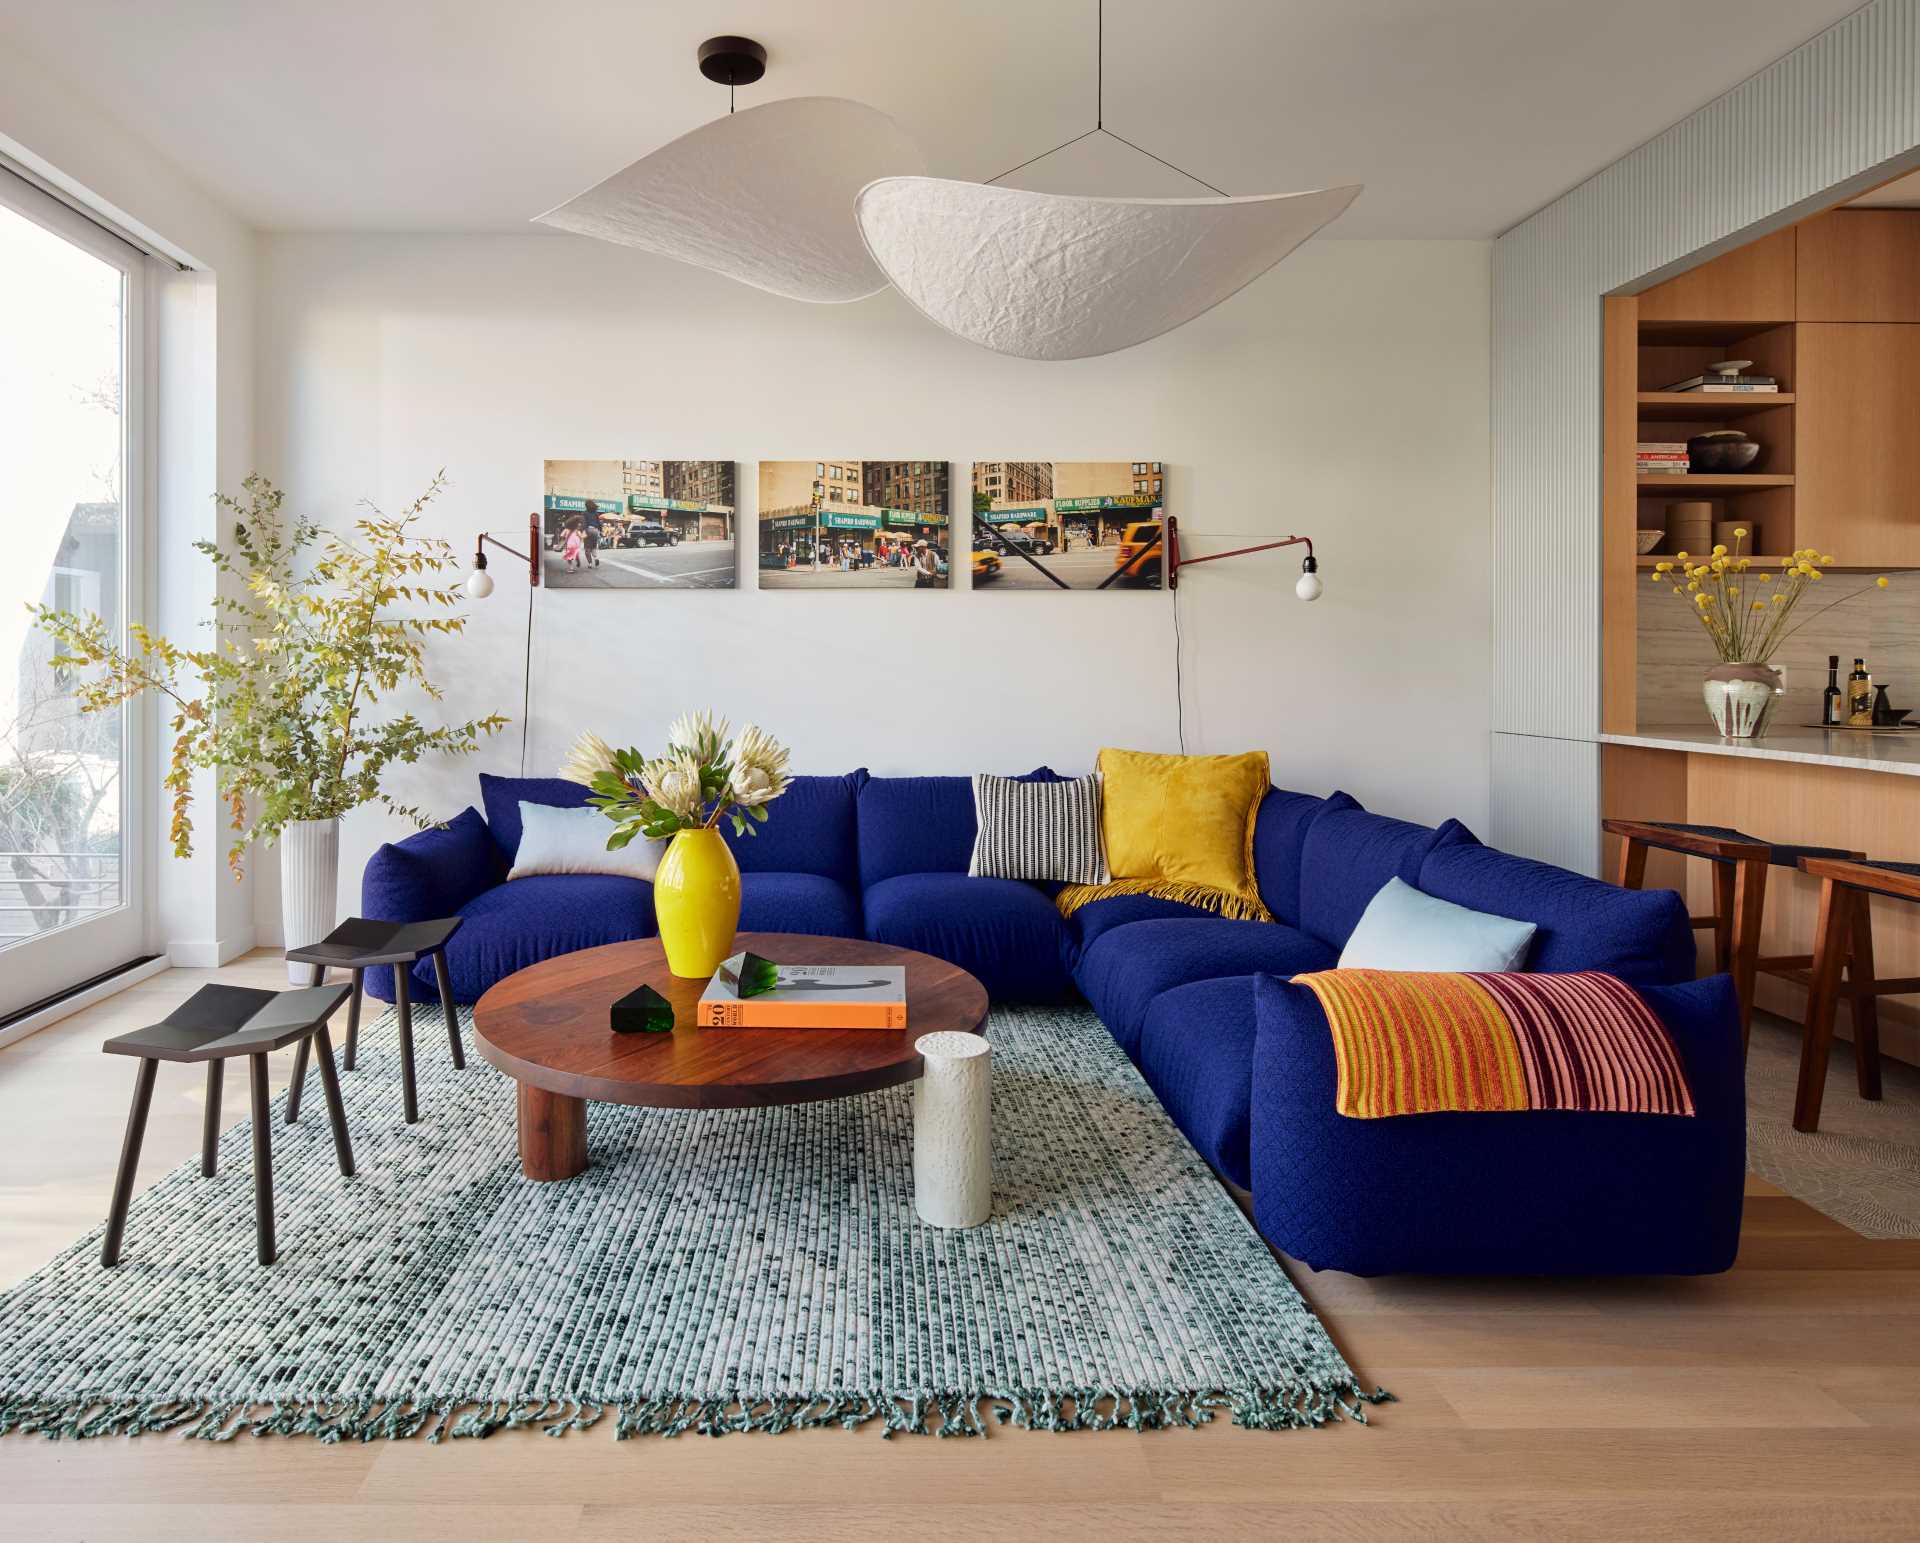 This modern living room looks out on the rear yard through floor-to-ceiling glass and includes a Marenco sectional in blue Kvadrat wool wraps, a coffee table by Hinterland Design, and a rug by Philippe Malouin.